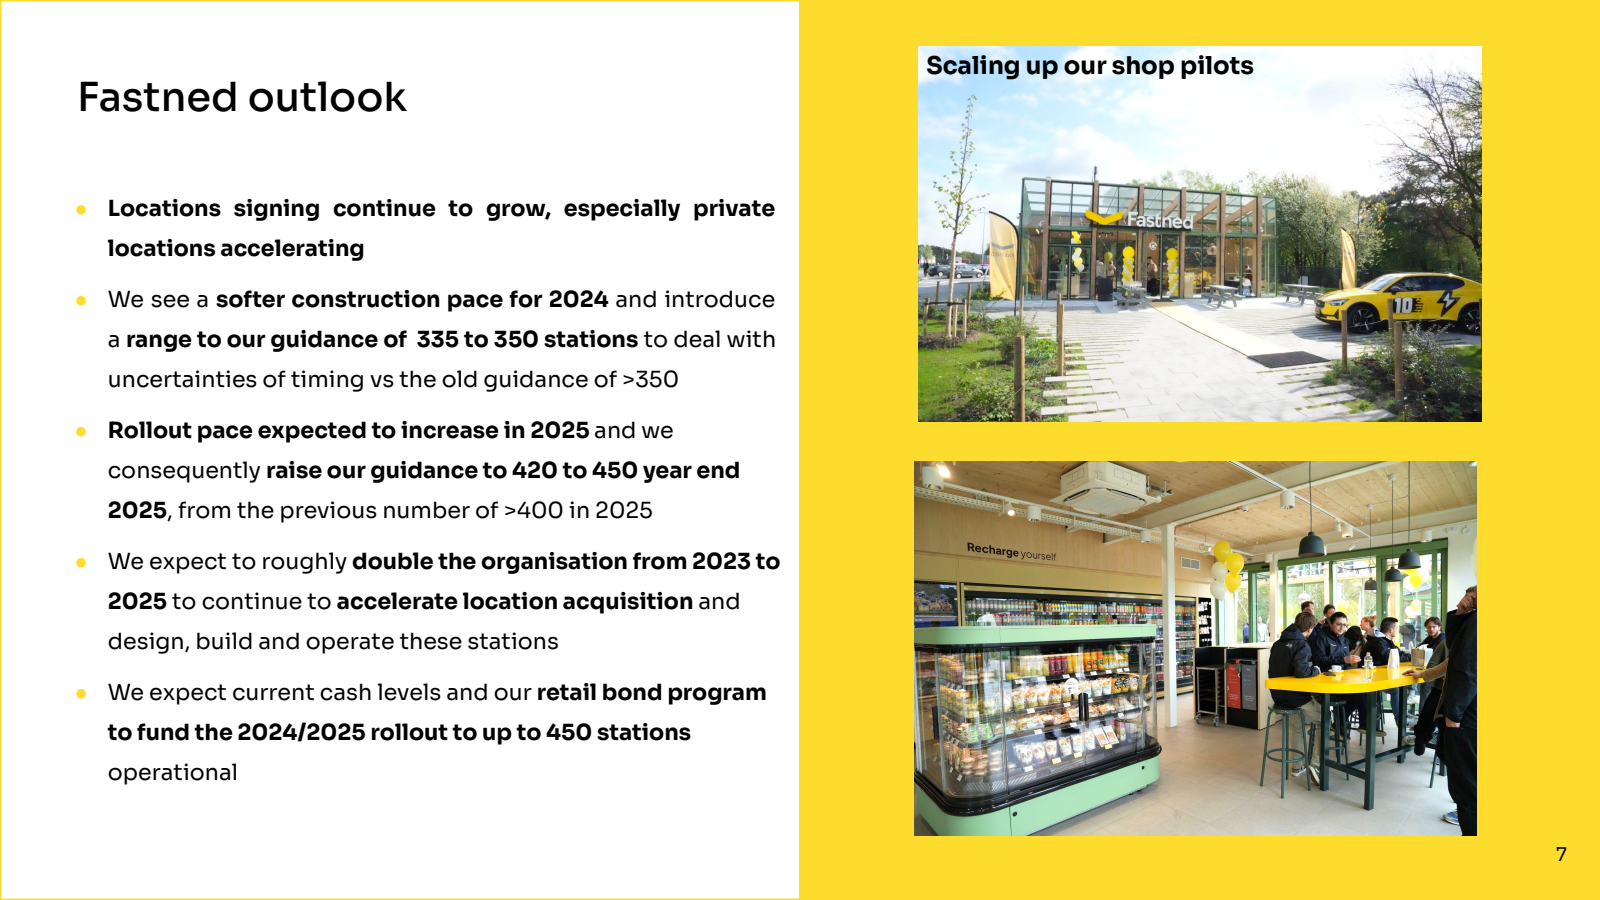 Fastned outlook 

Lo